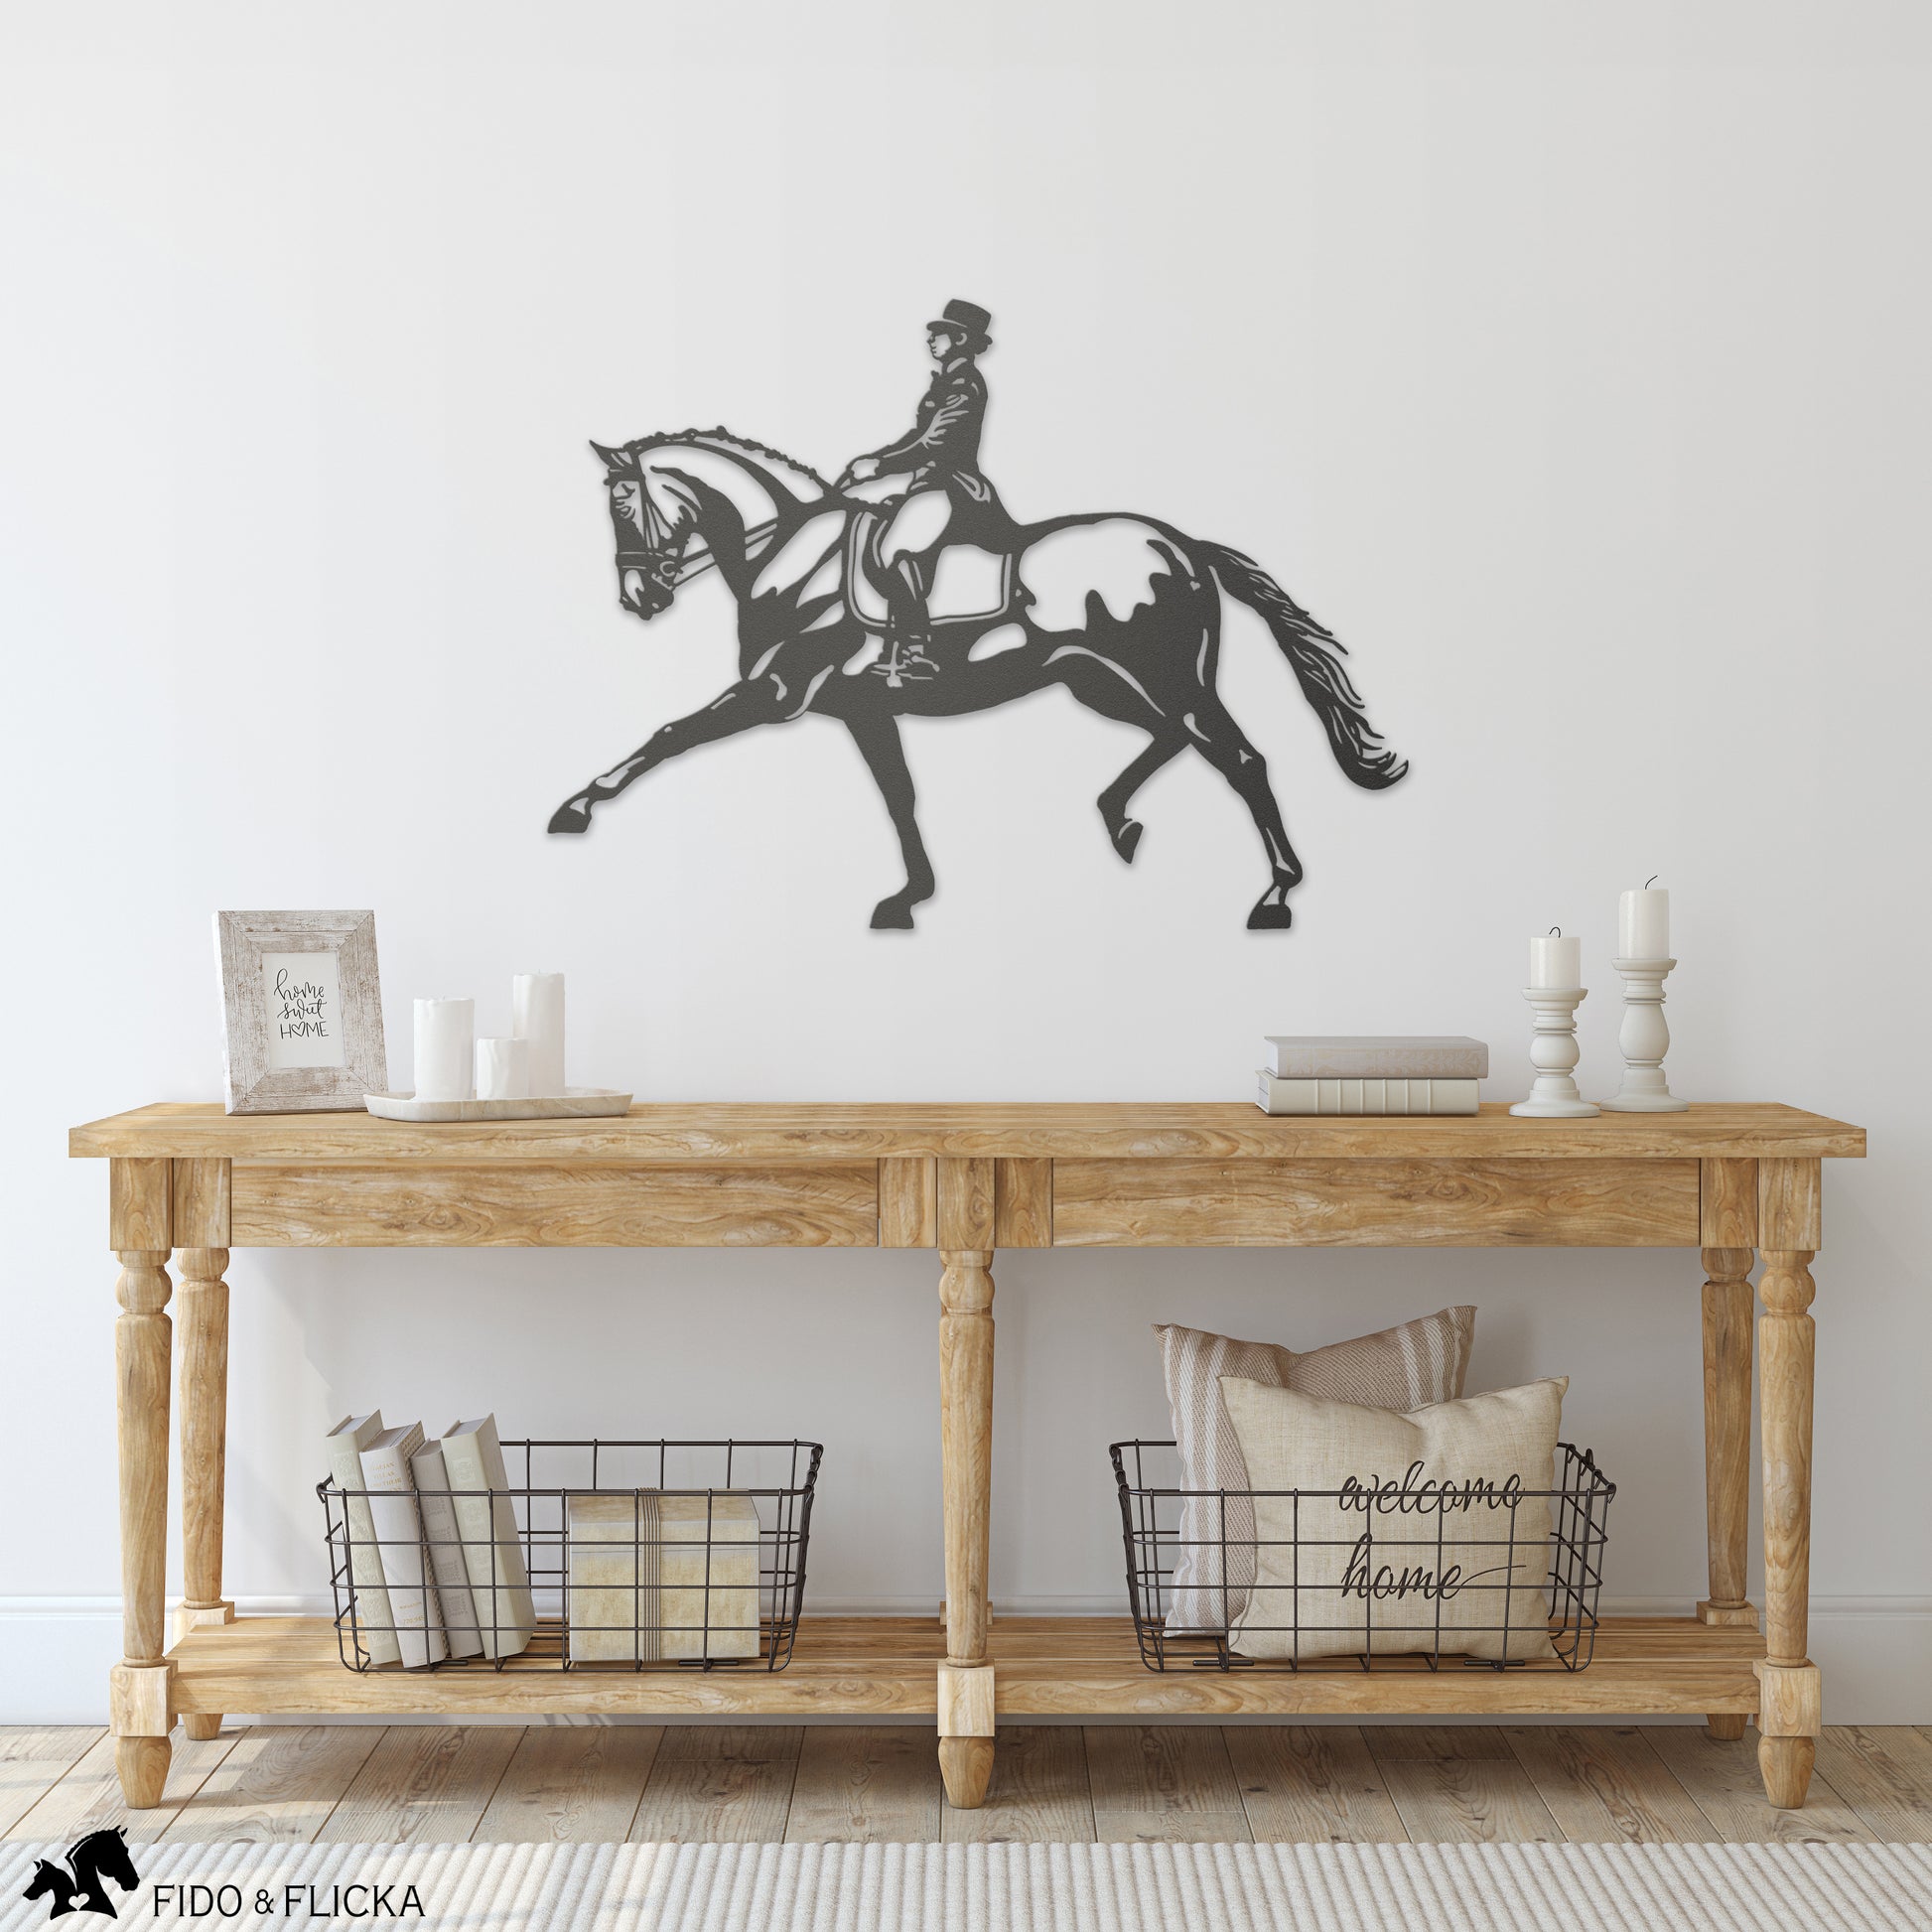 Metal dressage extended trot wall art in entry